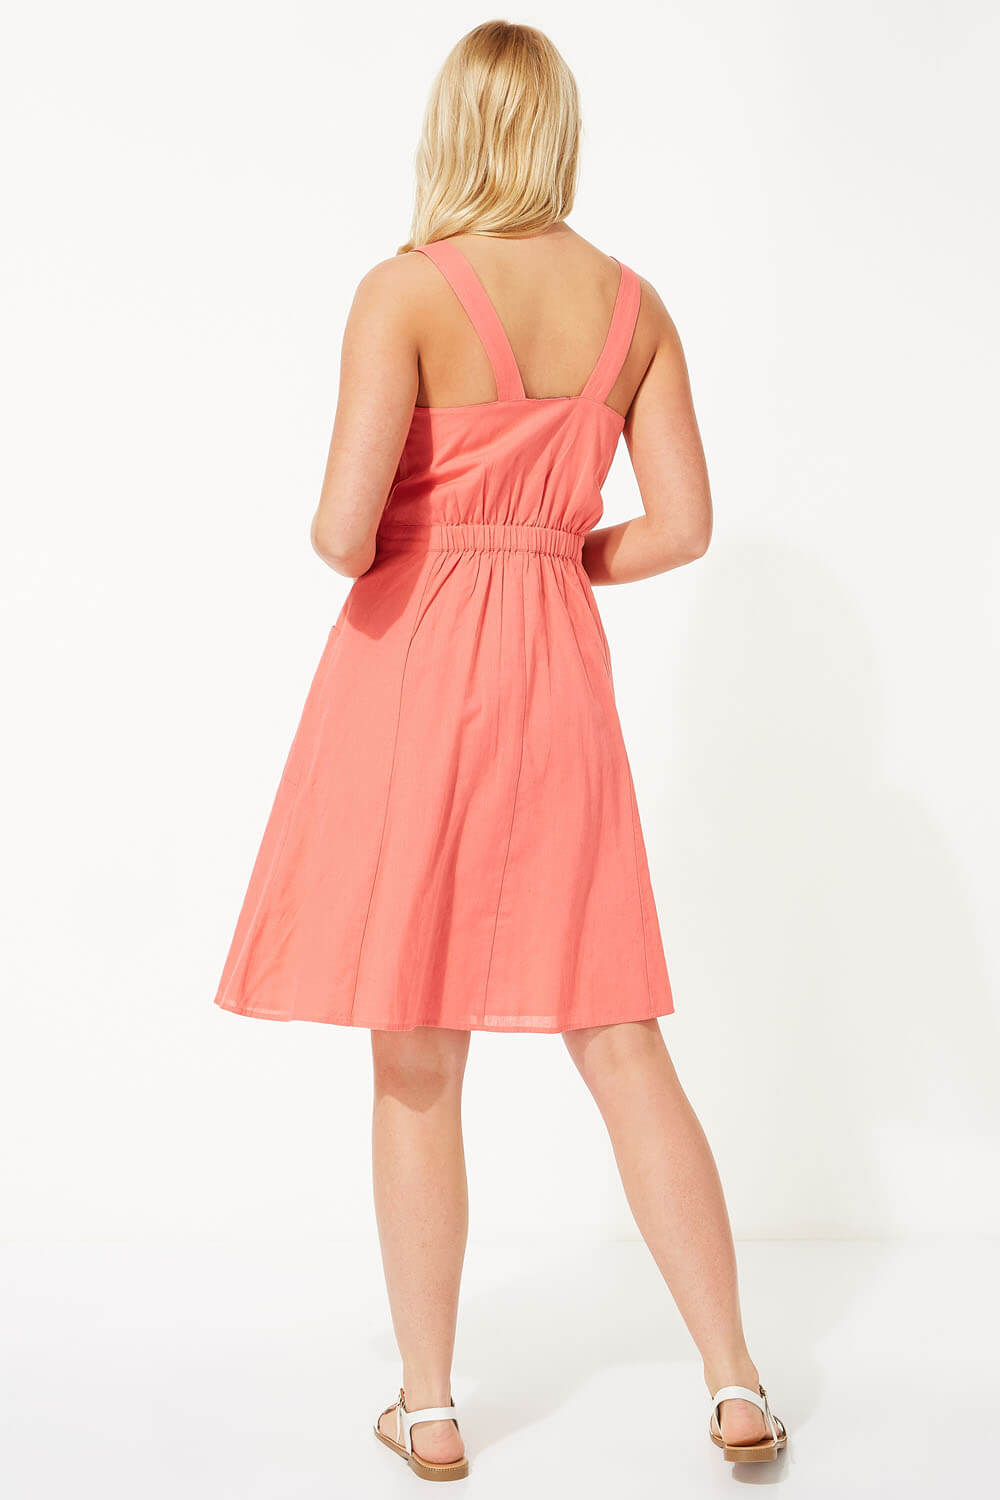 CORAL Fit and Flare Button Dress, Image 3 of 5